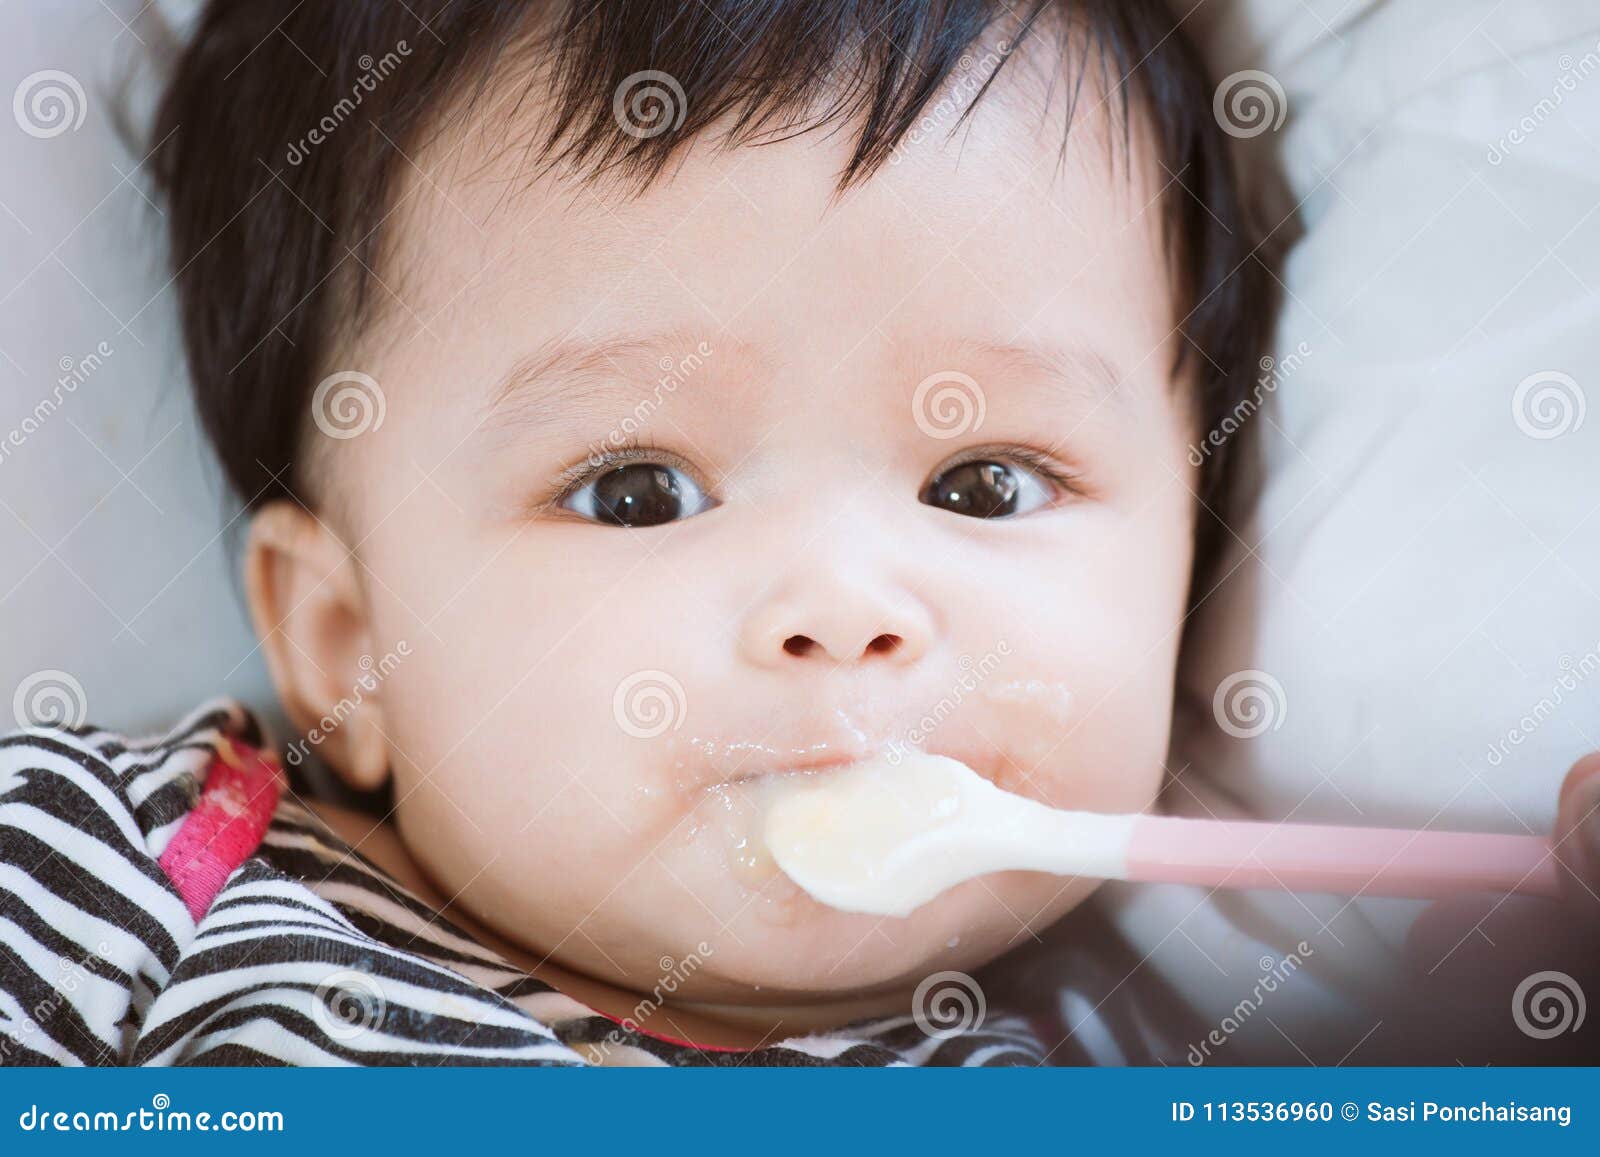 Mother Feeding Cute Asian Baby Girl With A Spoon At Home Stock Photo